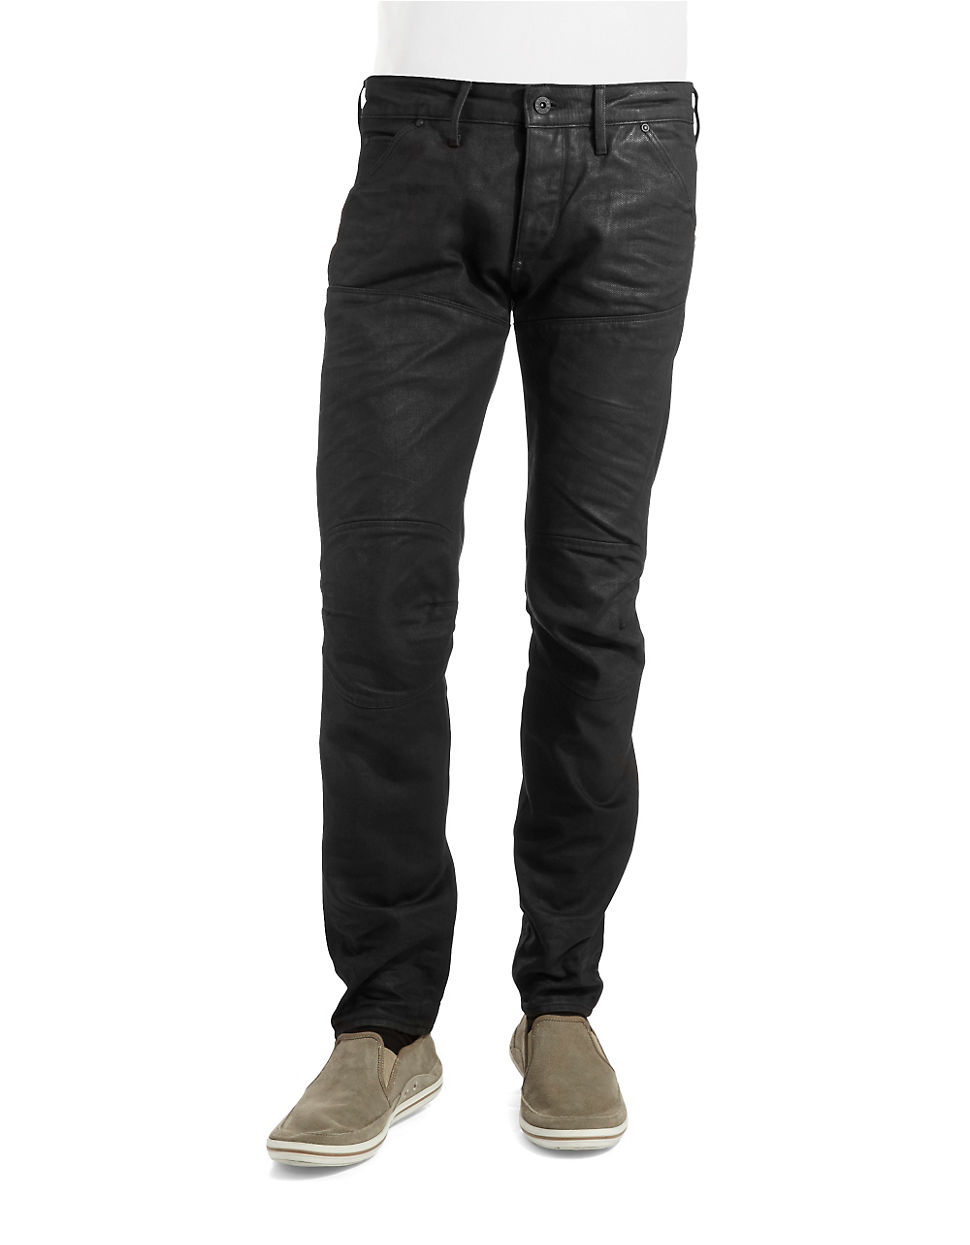 G-star Raw Tapered Jeans in Black for Men | Lyst